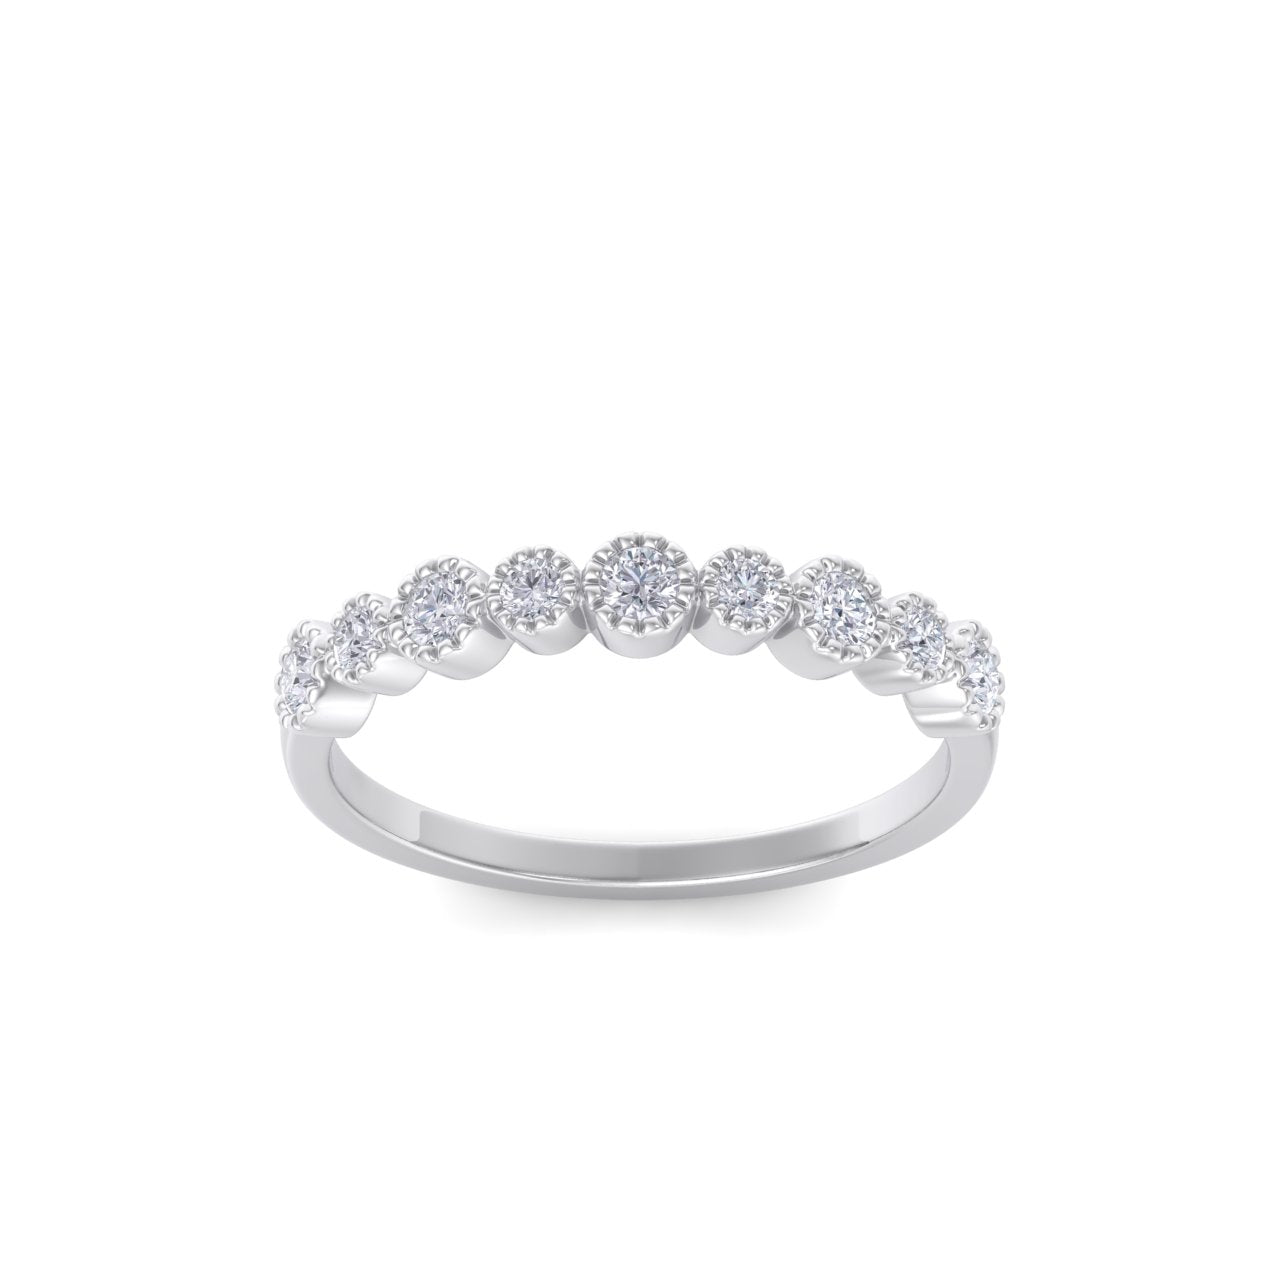 Milgrain wedding band in white gold with white diamonds of 0.25 ct in weight